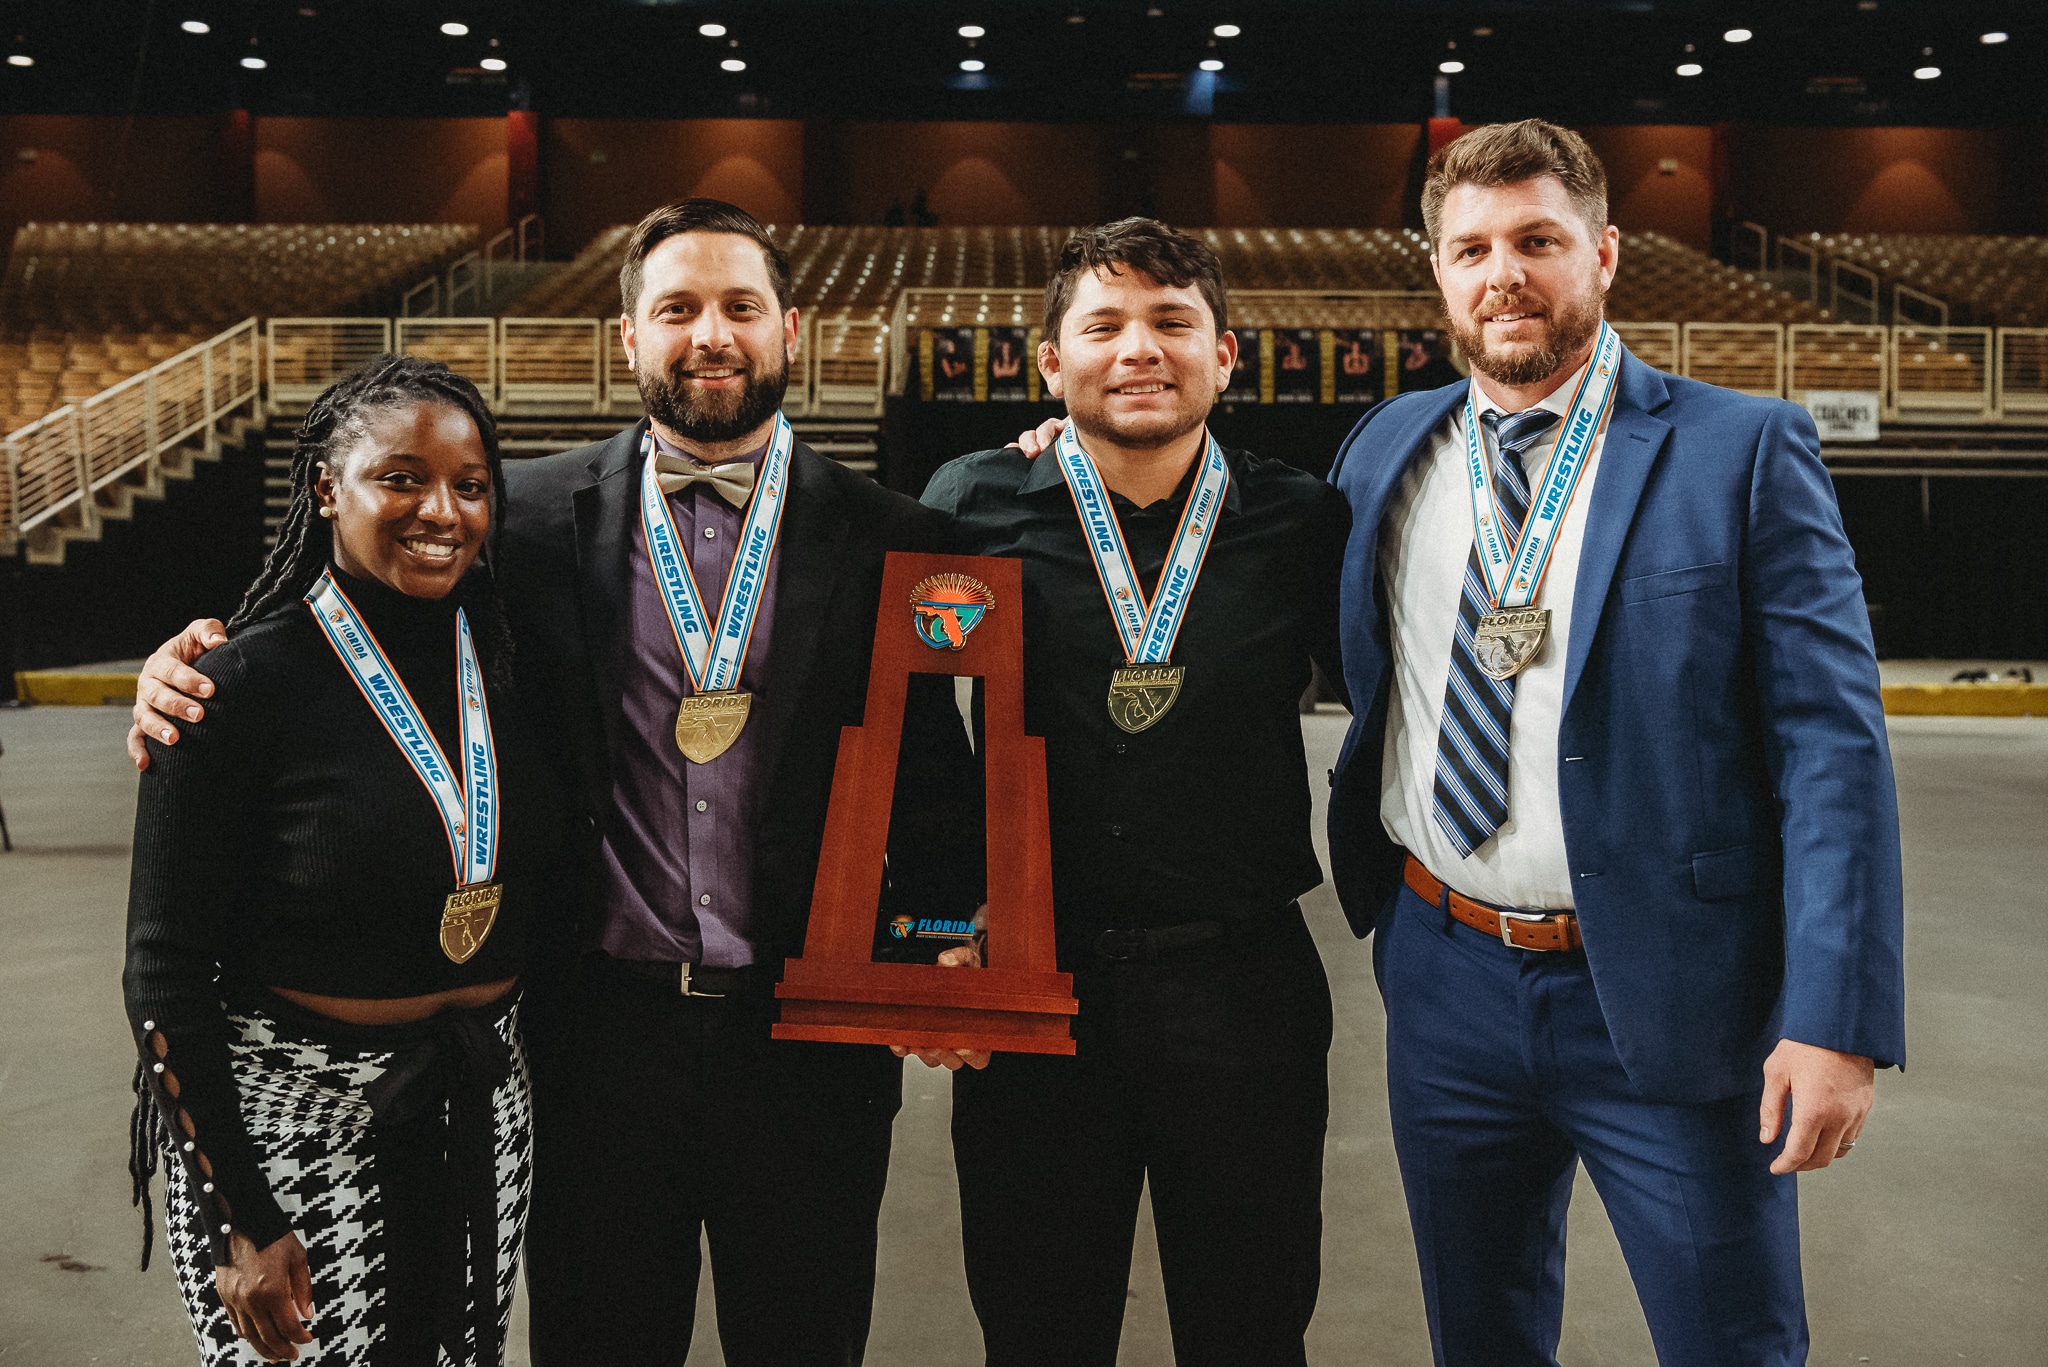 Hernando Coaches after winning their first ever team state championship title. (Left to right: Coach Heaven-Leigh Jackson, Coach Kenneth Day, Coach Brian Pena, Coach David Pritz)